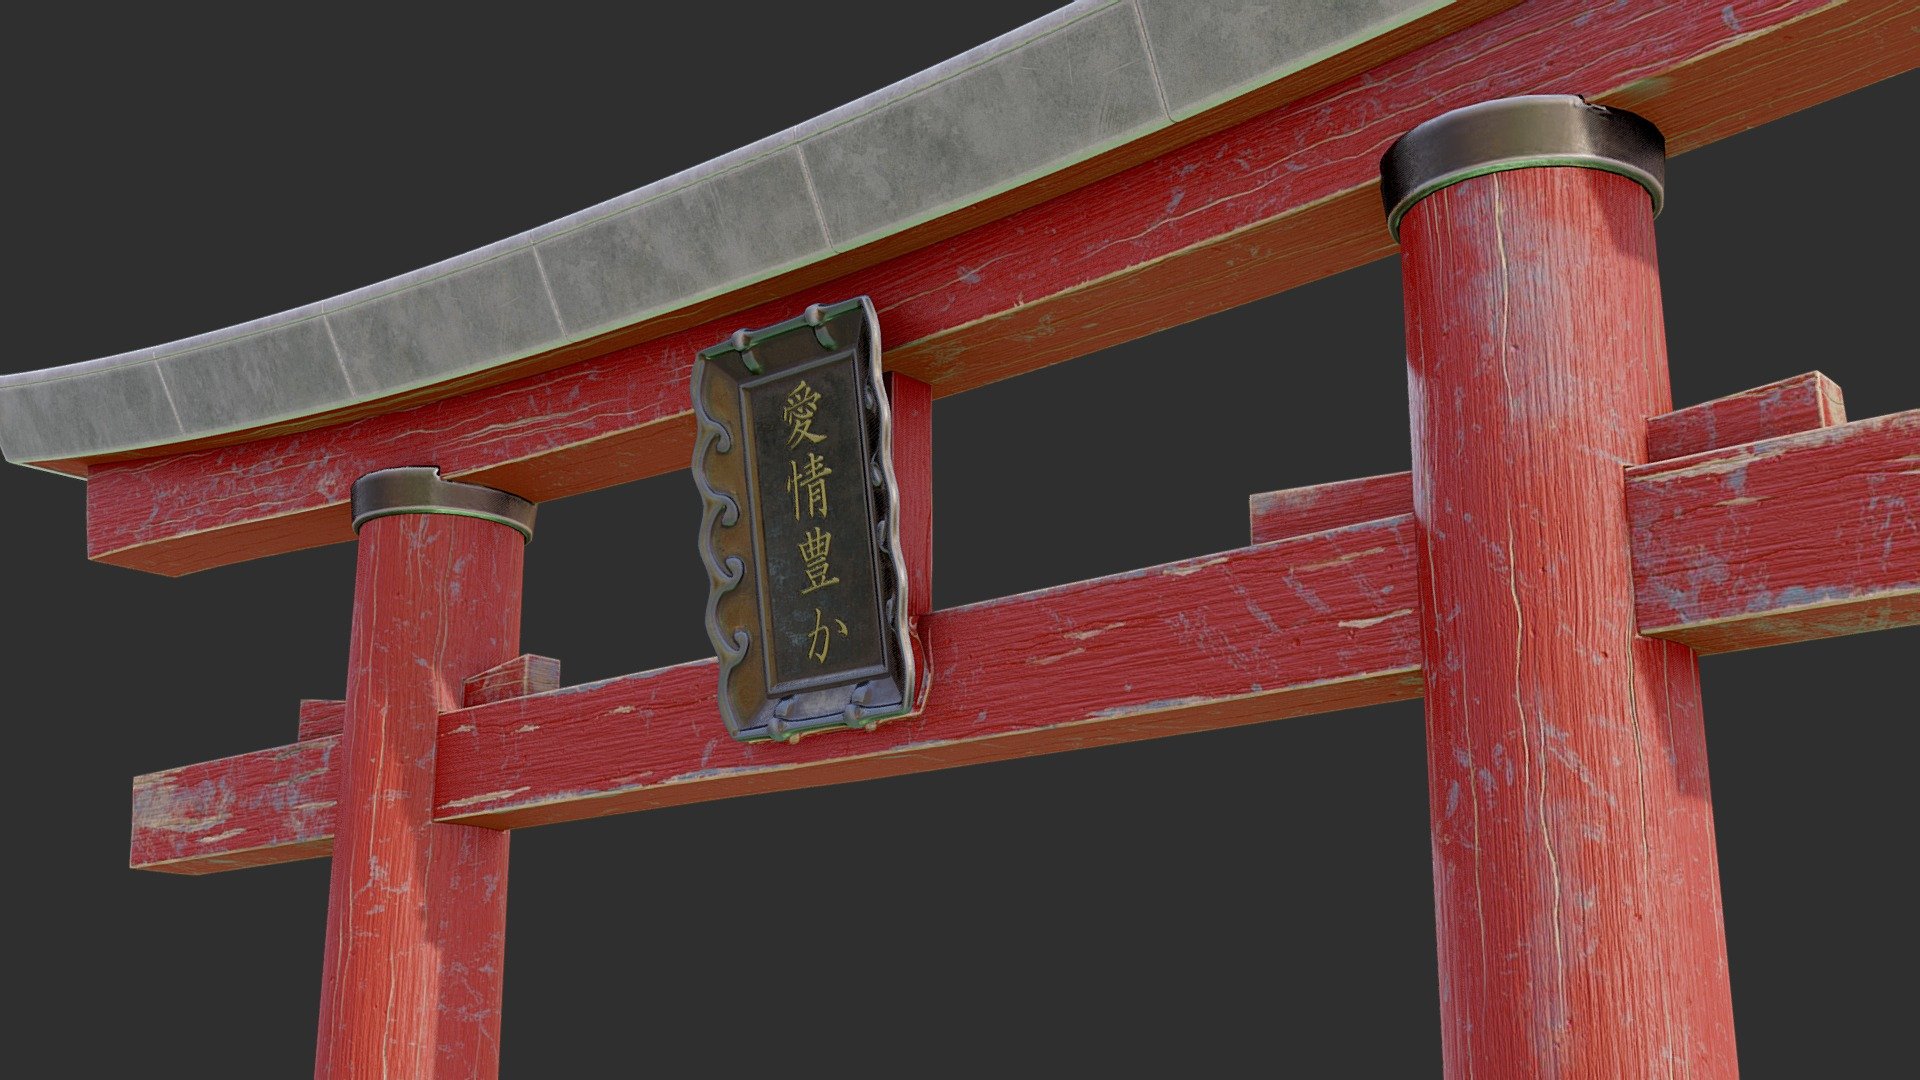 Japanese Torii Gate

This asset was crafted as part of a texturing training initiative, drawing inspiration from anime films.

A comprehensive set of 4K textures is readily available 3d model